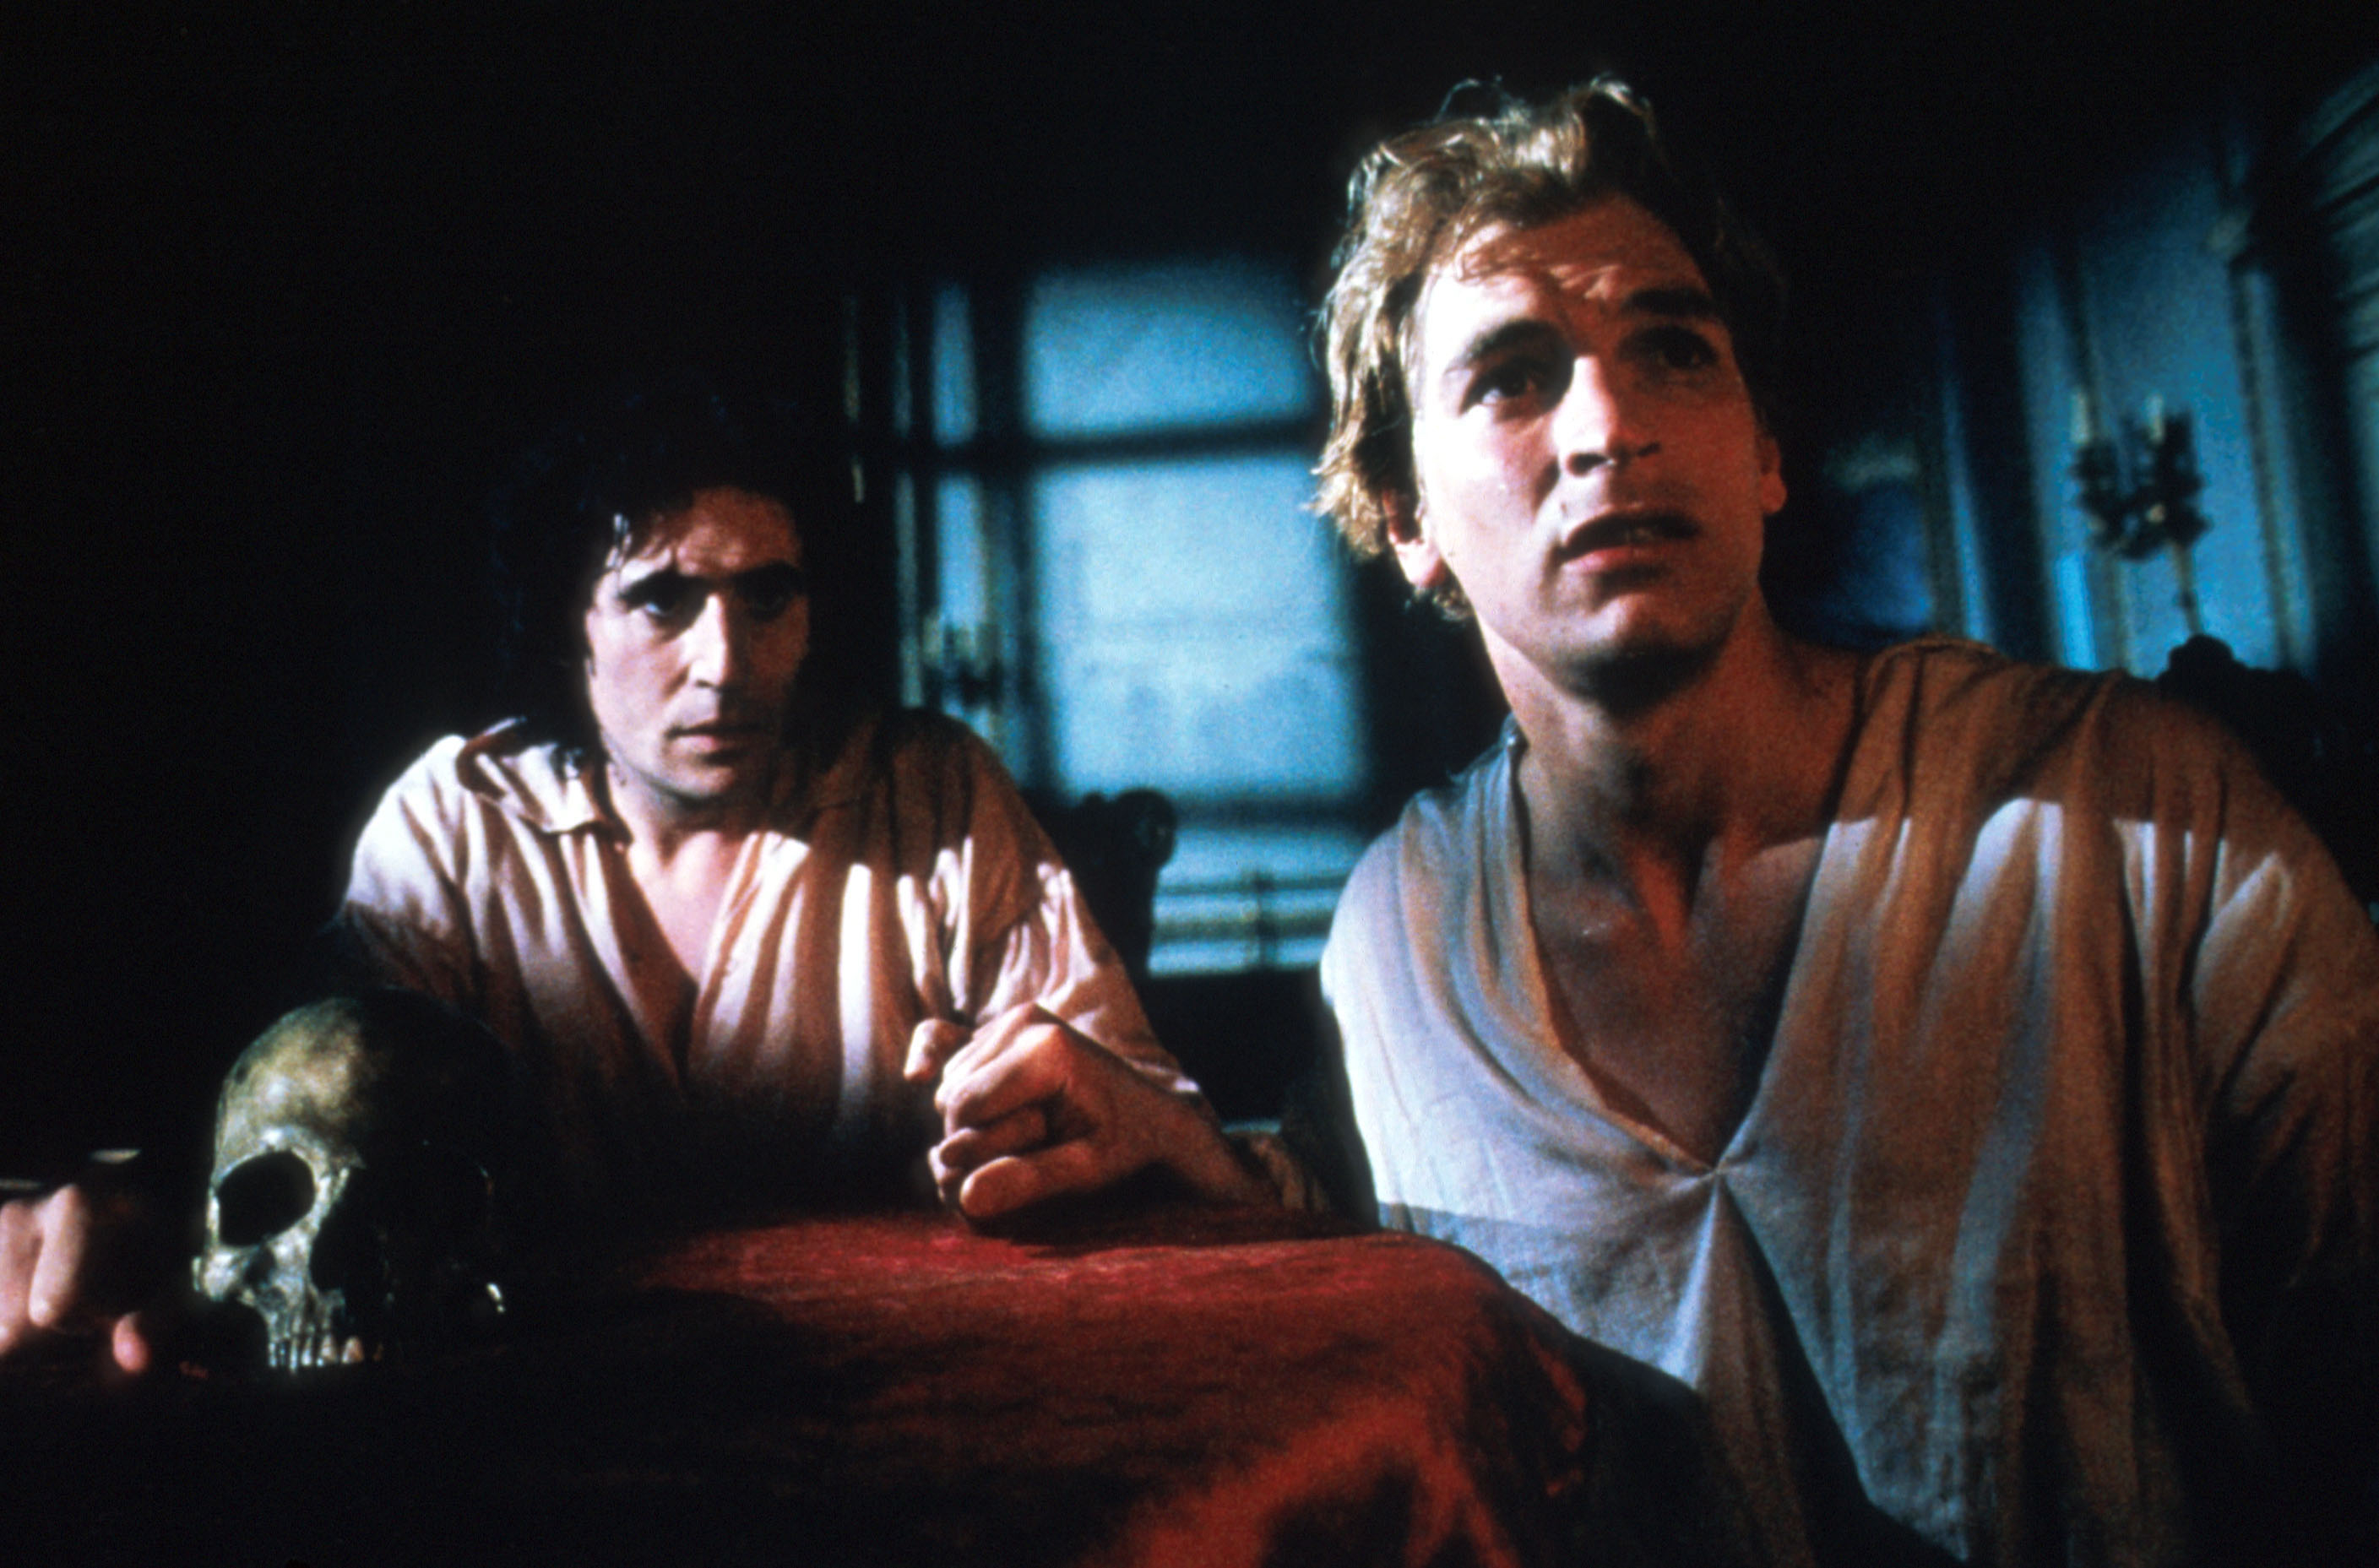 Julian Sands and Gabriel Byrne sit fearfully near a table adorning a skull